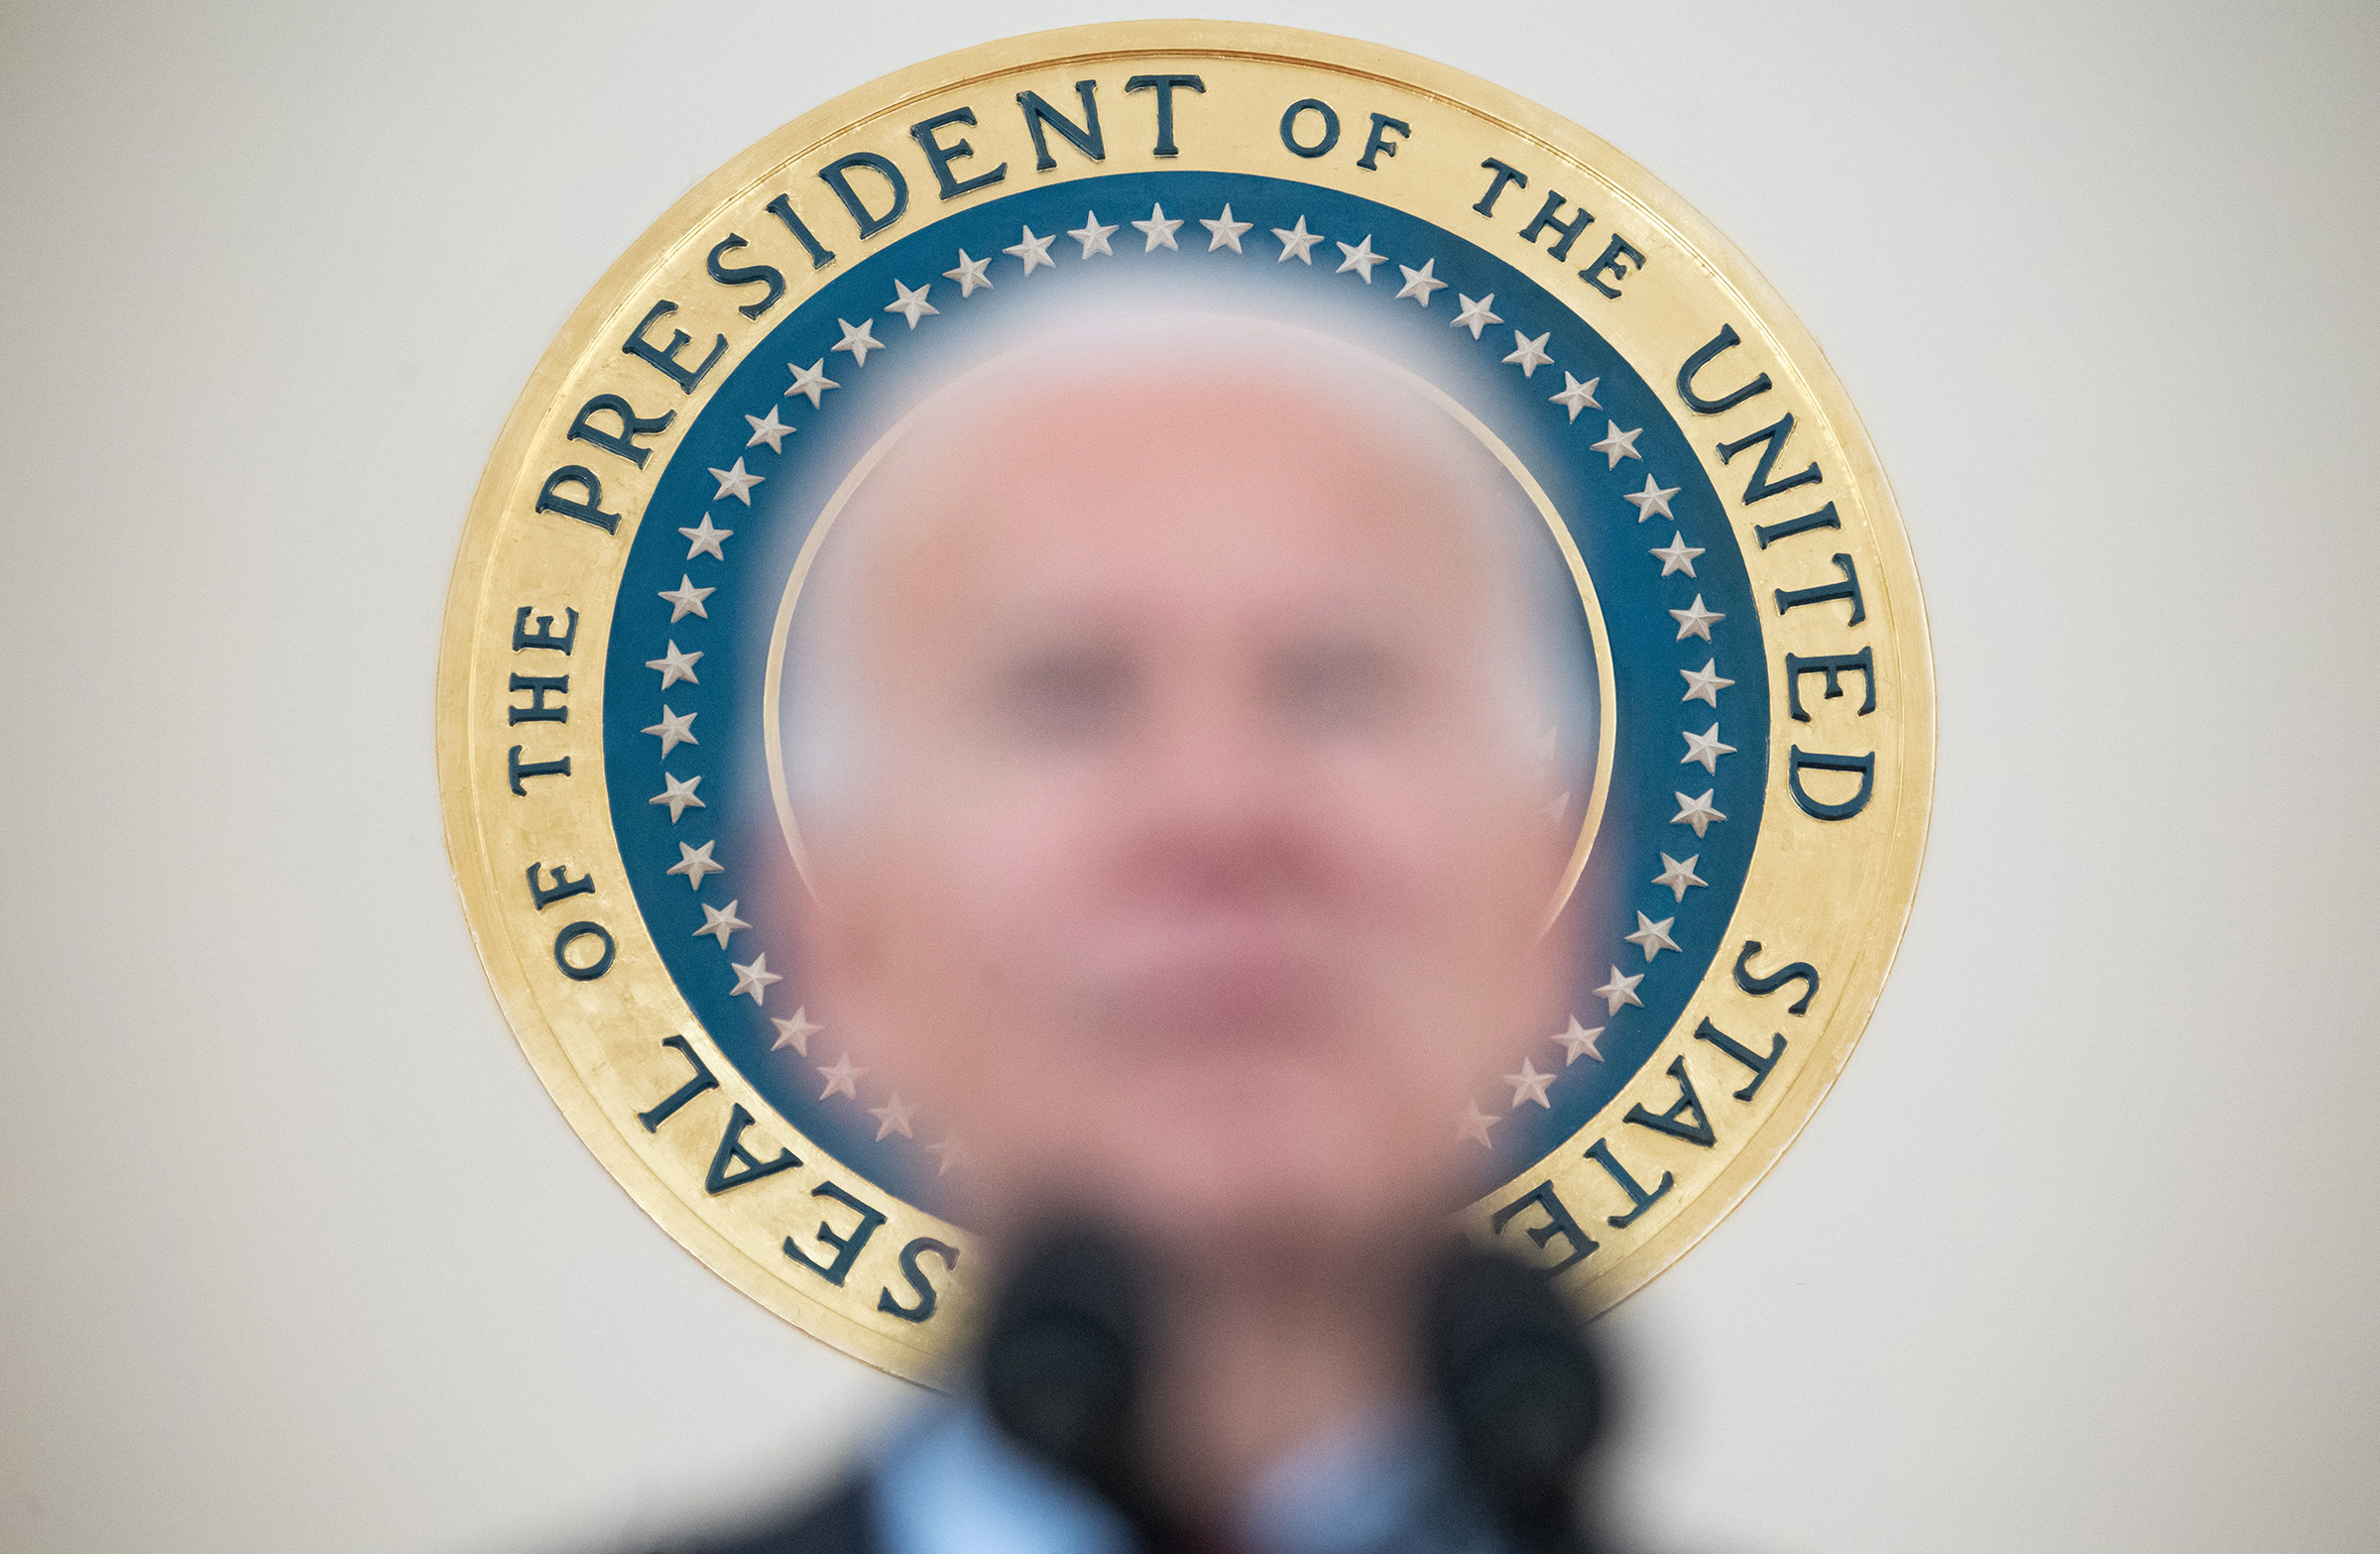 The seal of the President of the United States is seen as President Joe Biden speaks about lives lost to COVID-19 after the death toll passed 500,000, at the White House on Feb. 22, 2021. (Saul Loeb—AFP/Getty Images)